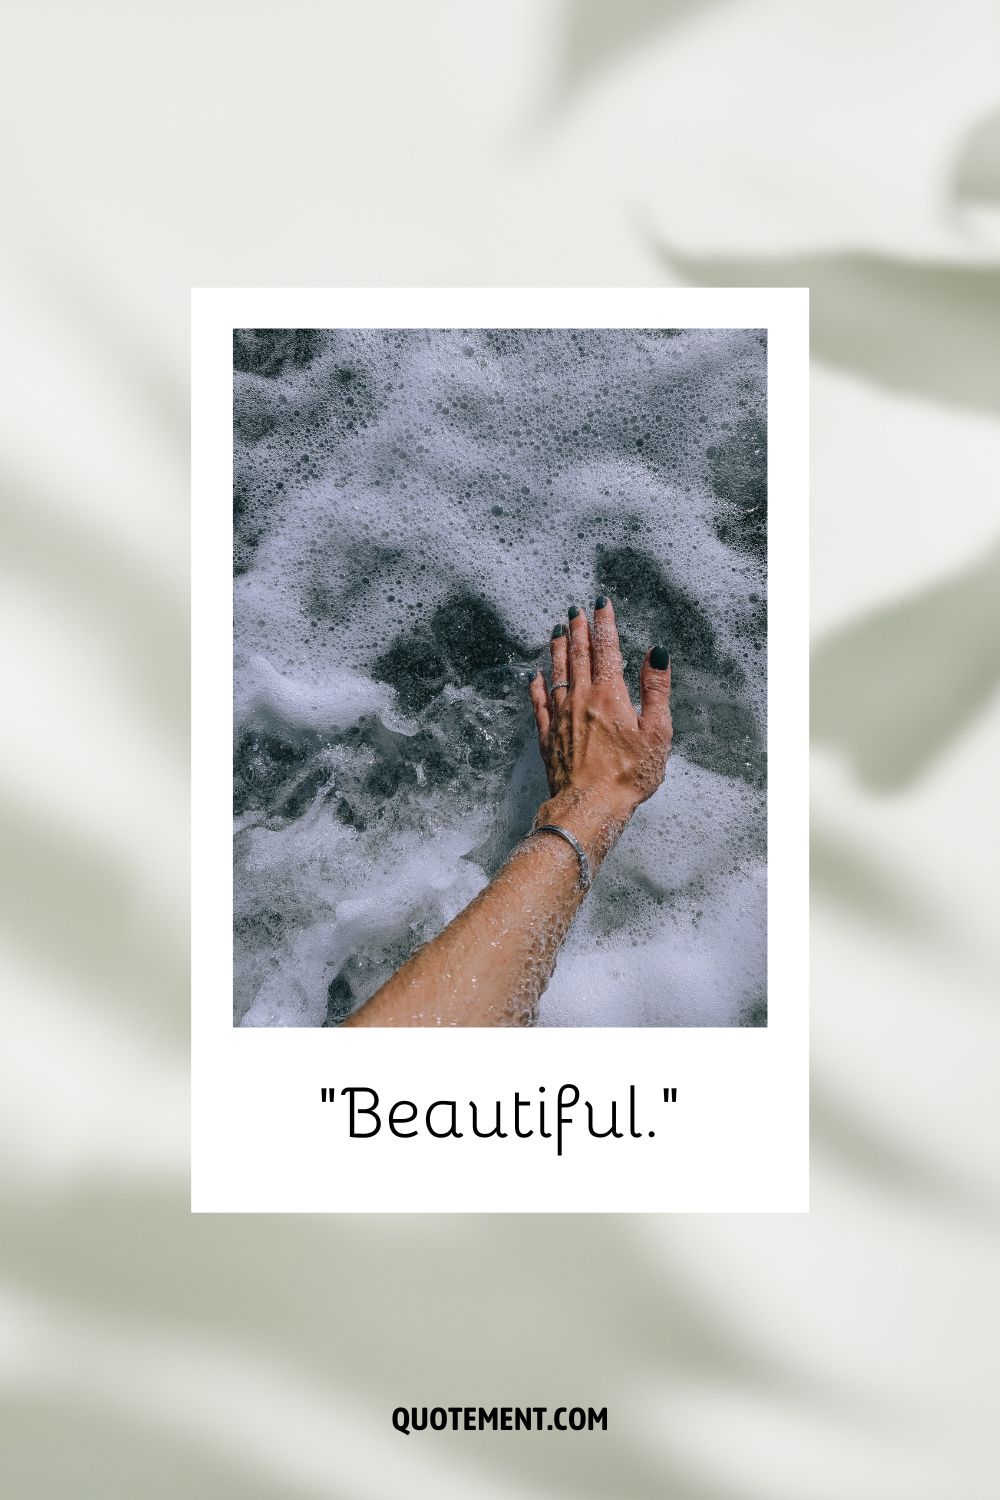 A woman's hand touching foamy water representing an inspiring one word quote
